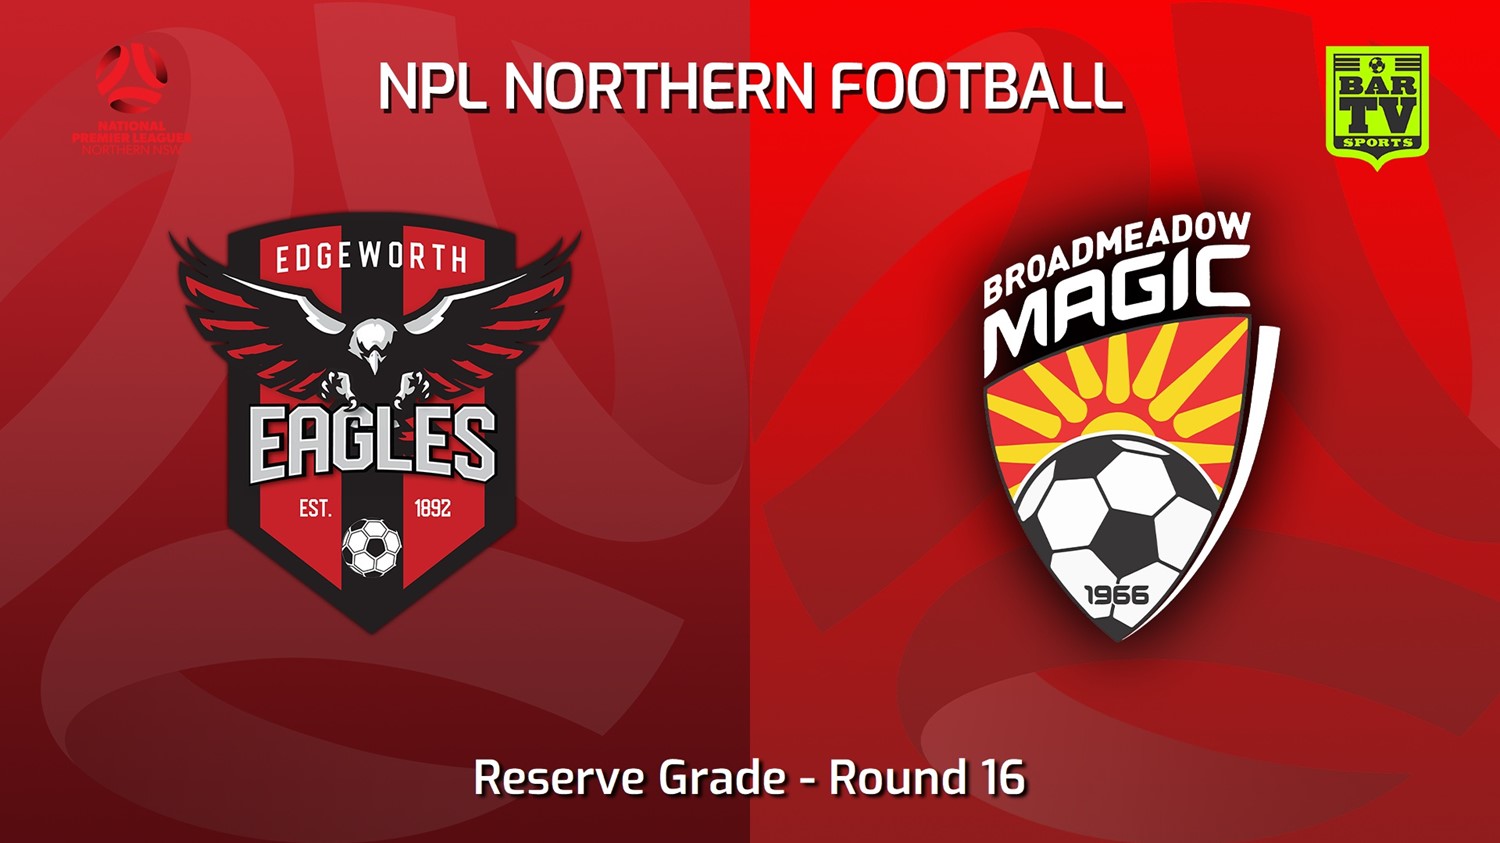 220625-NNSW NPLM Res Round 16 - Edgeworth Eagles Res v Broadmeadow Magic Res Minigame Slate Image